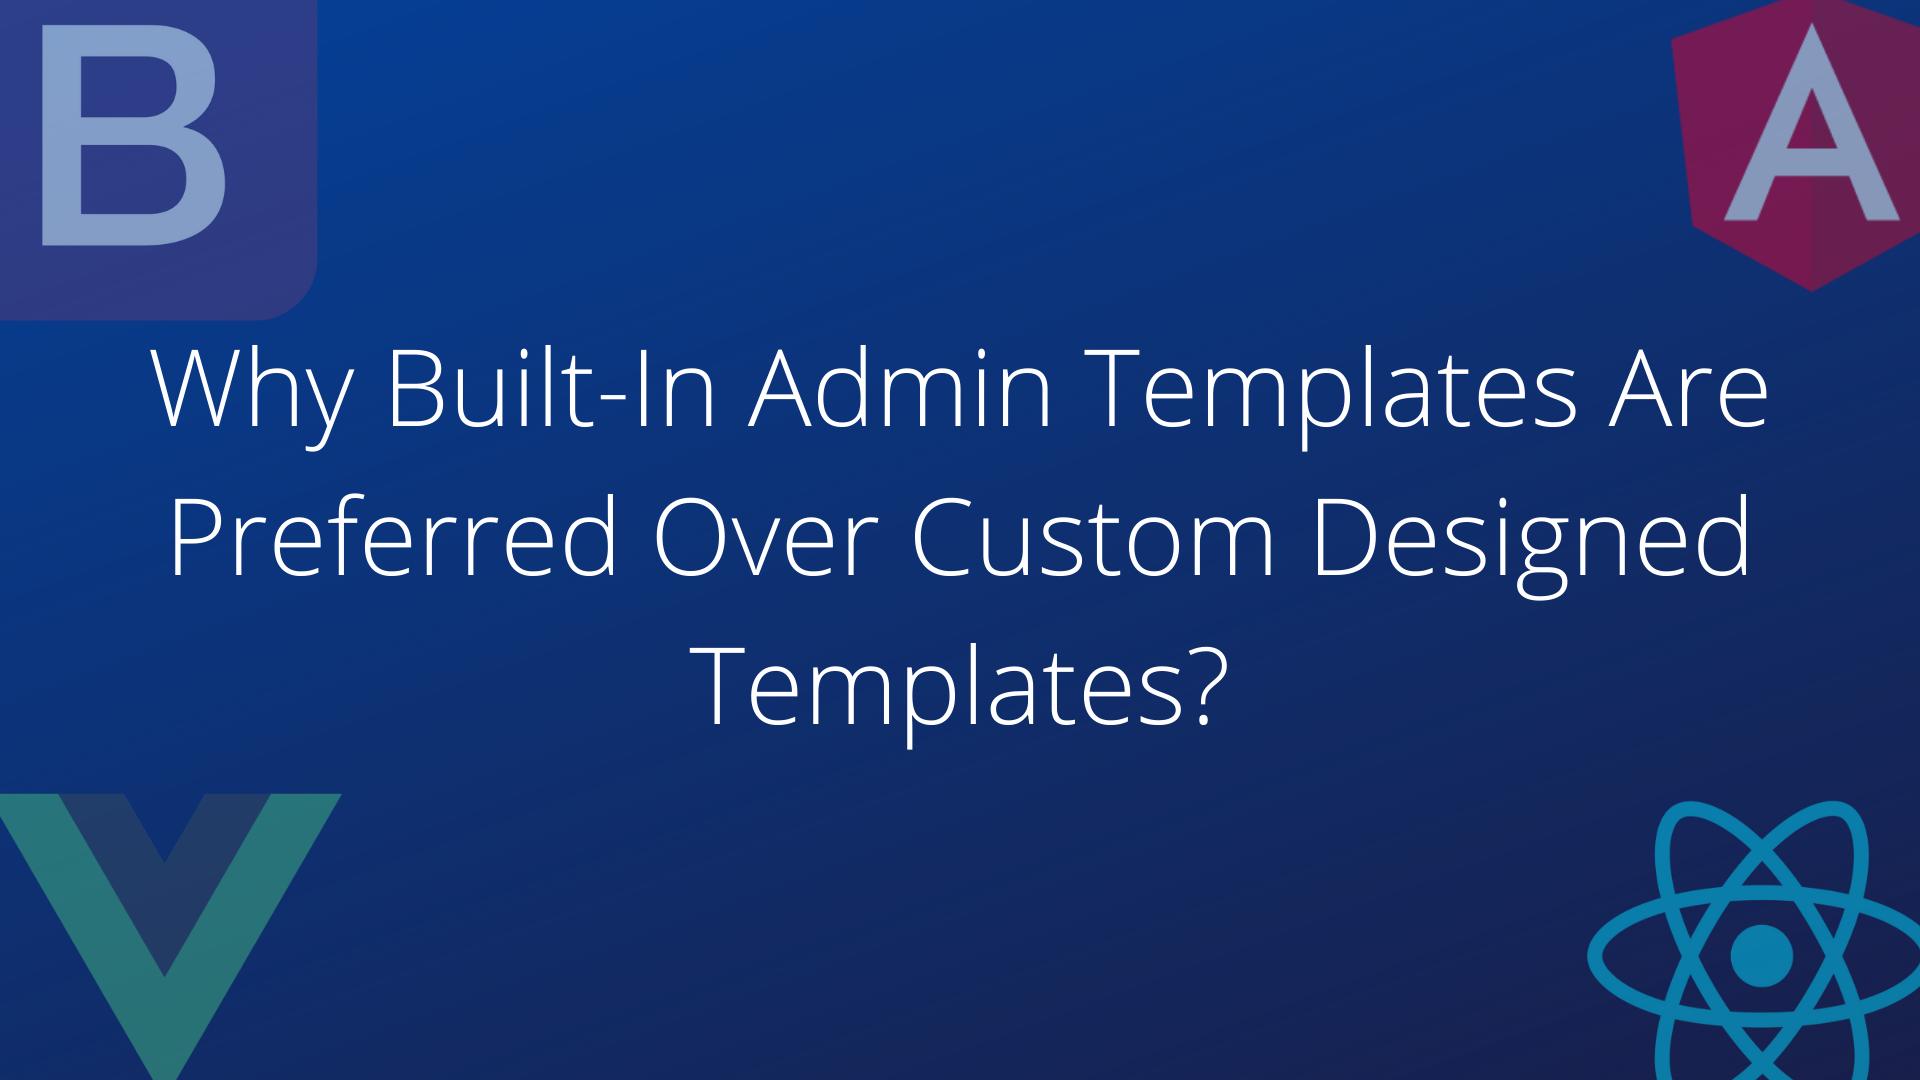 Why Built-In Admin Templates Are Preferred Over Custom Designed Templates?